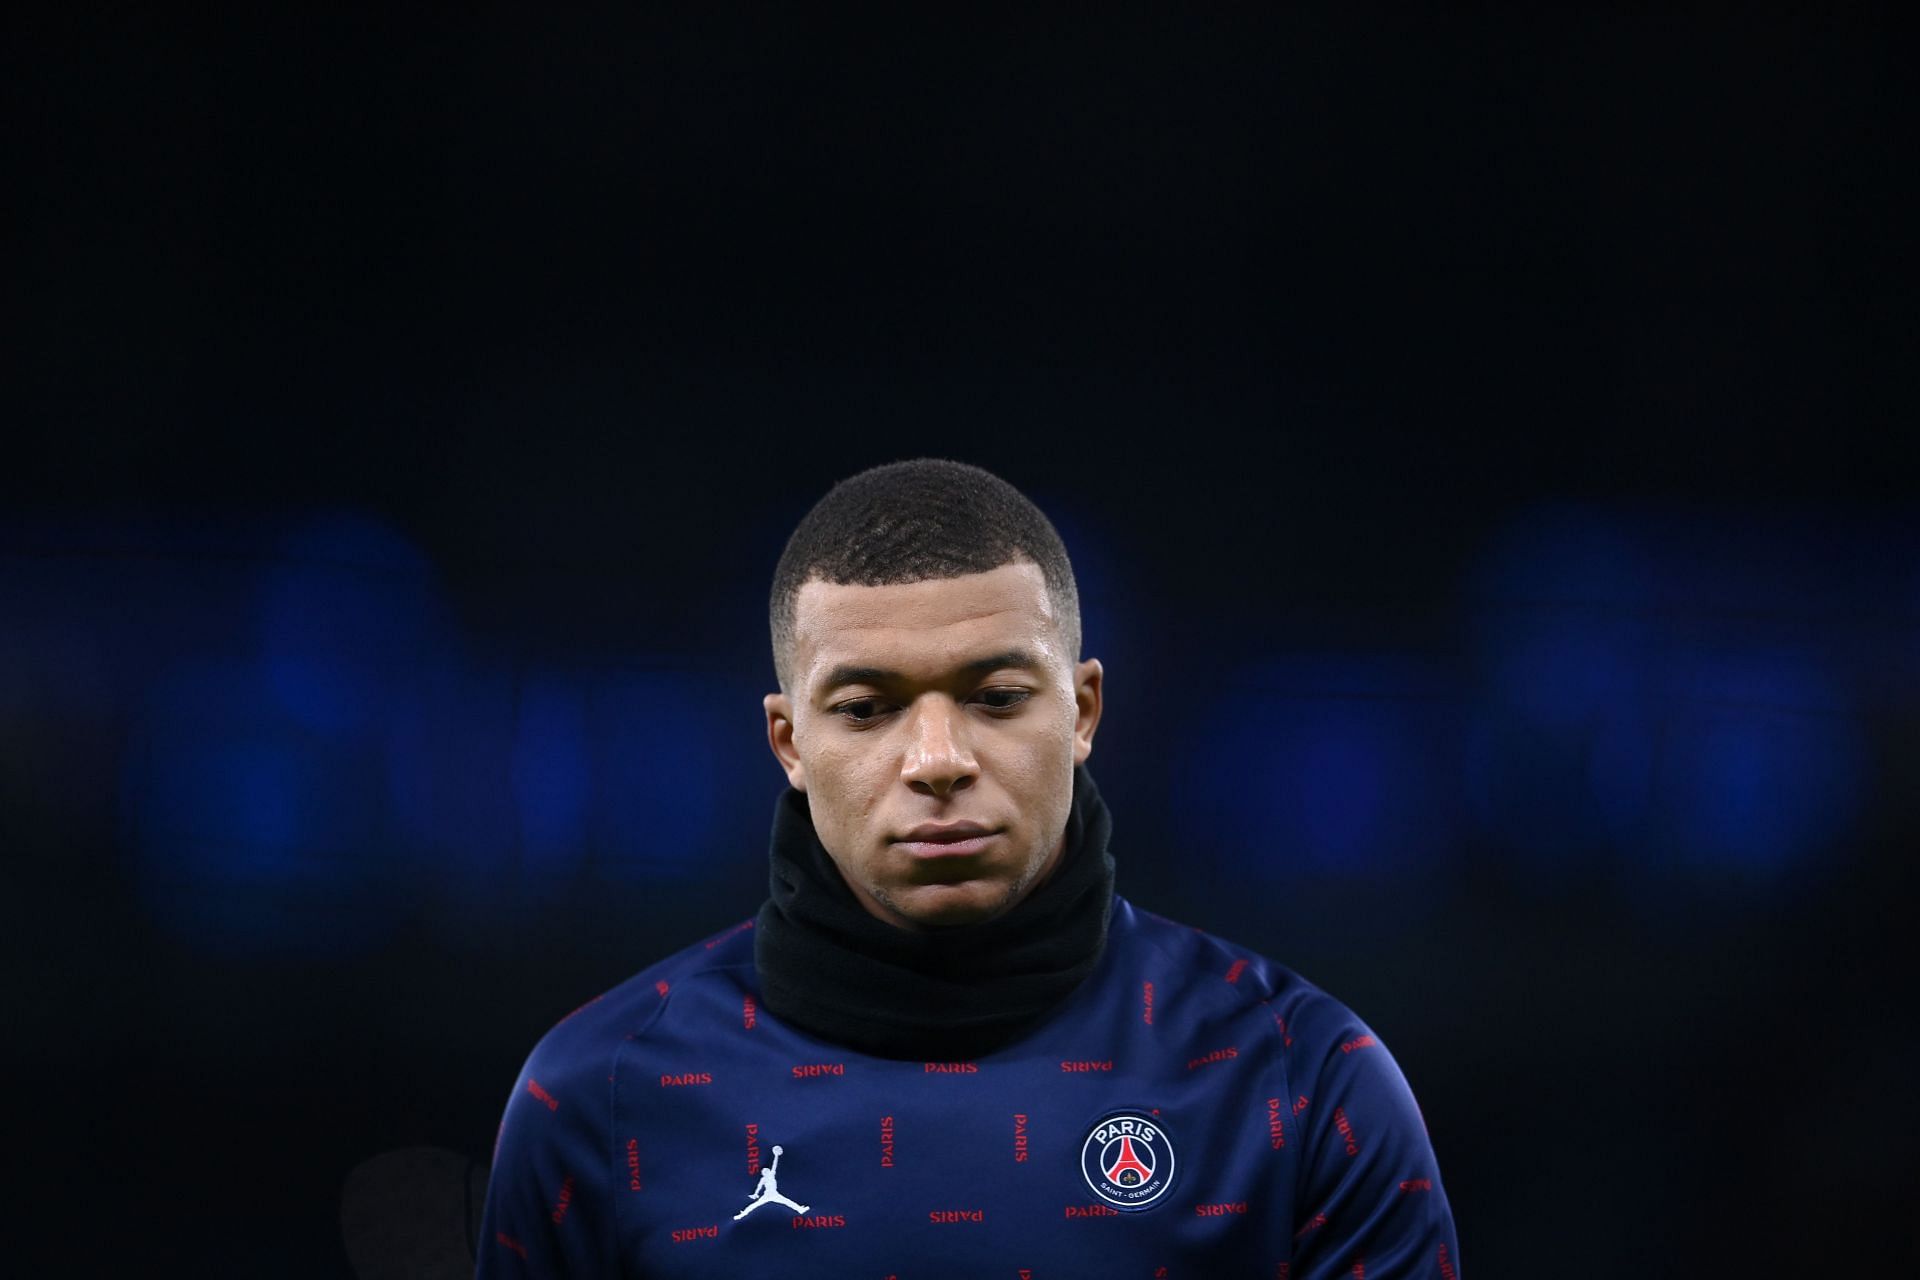 Kylian Mbappe&rsquo;s future remains undecided.